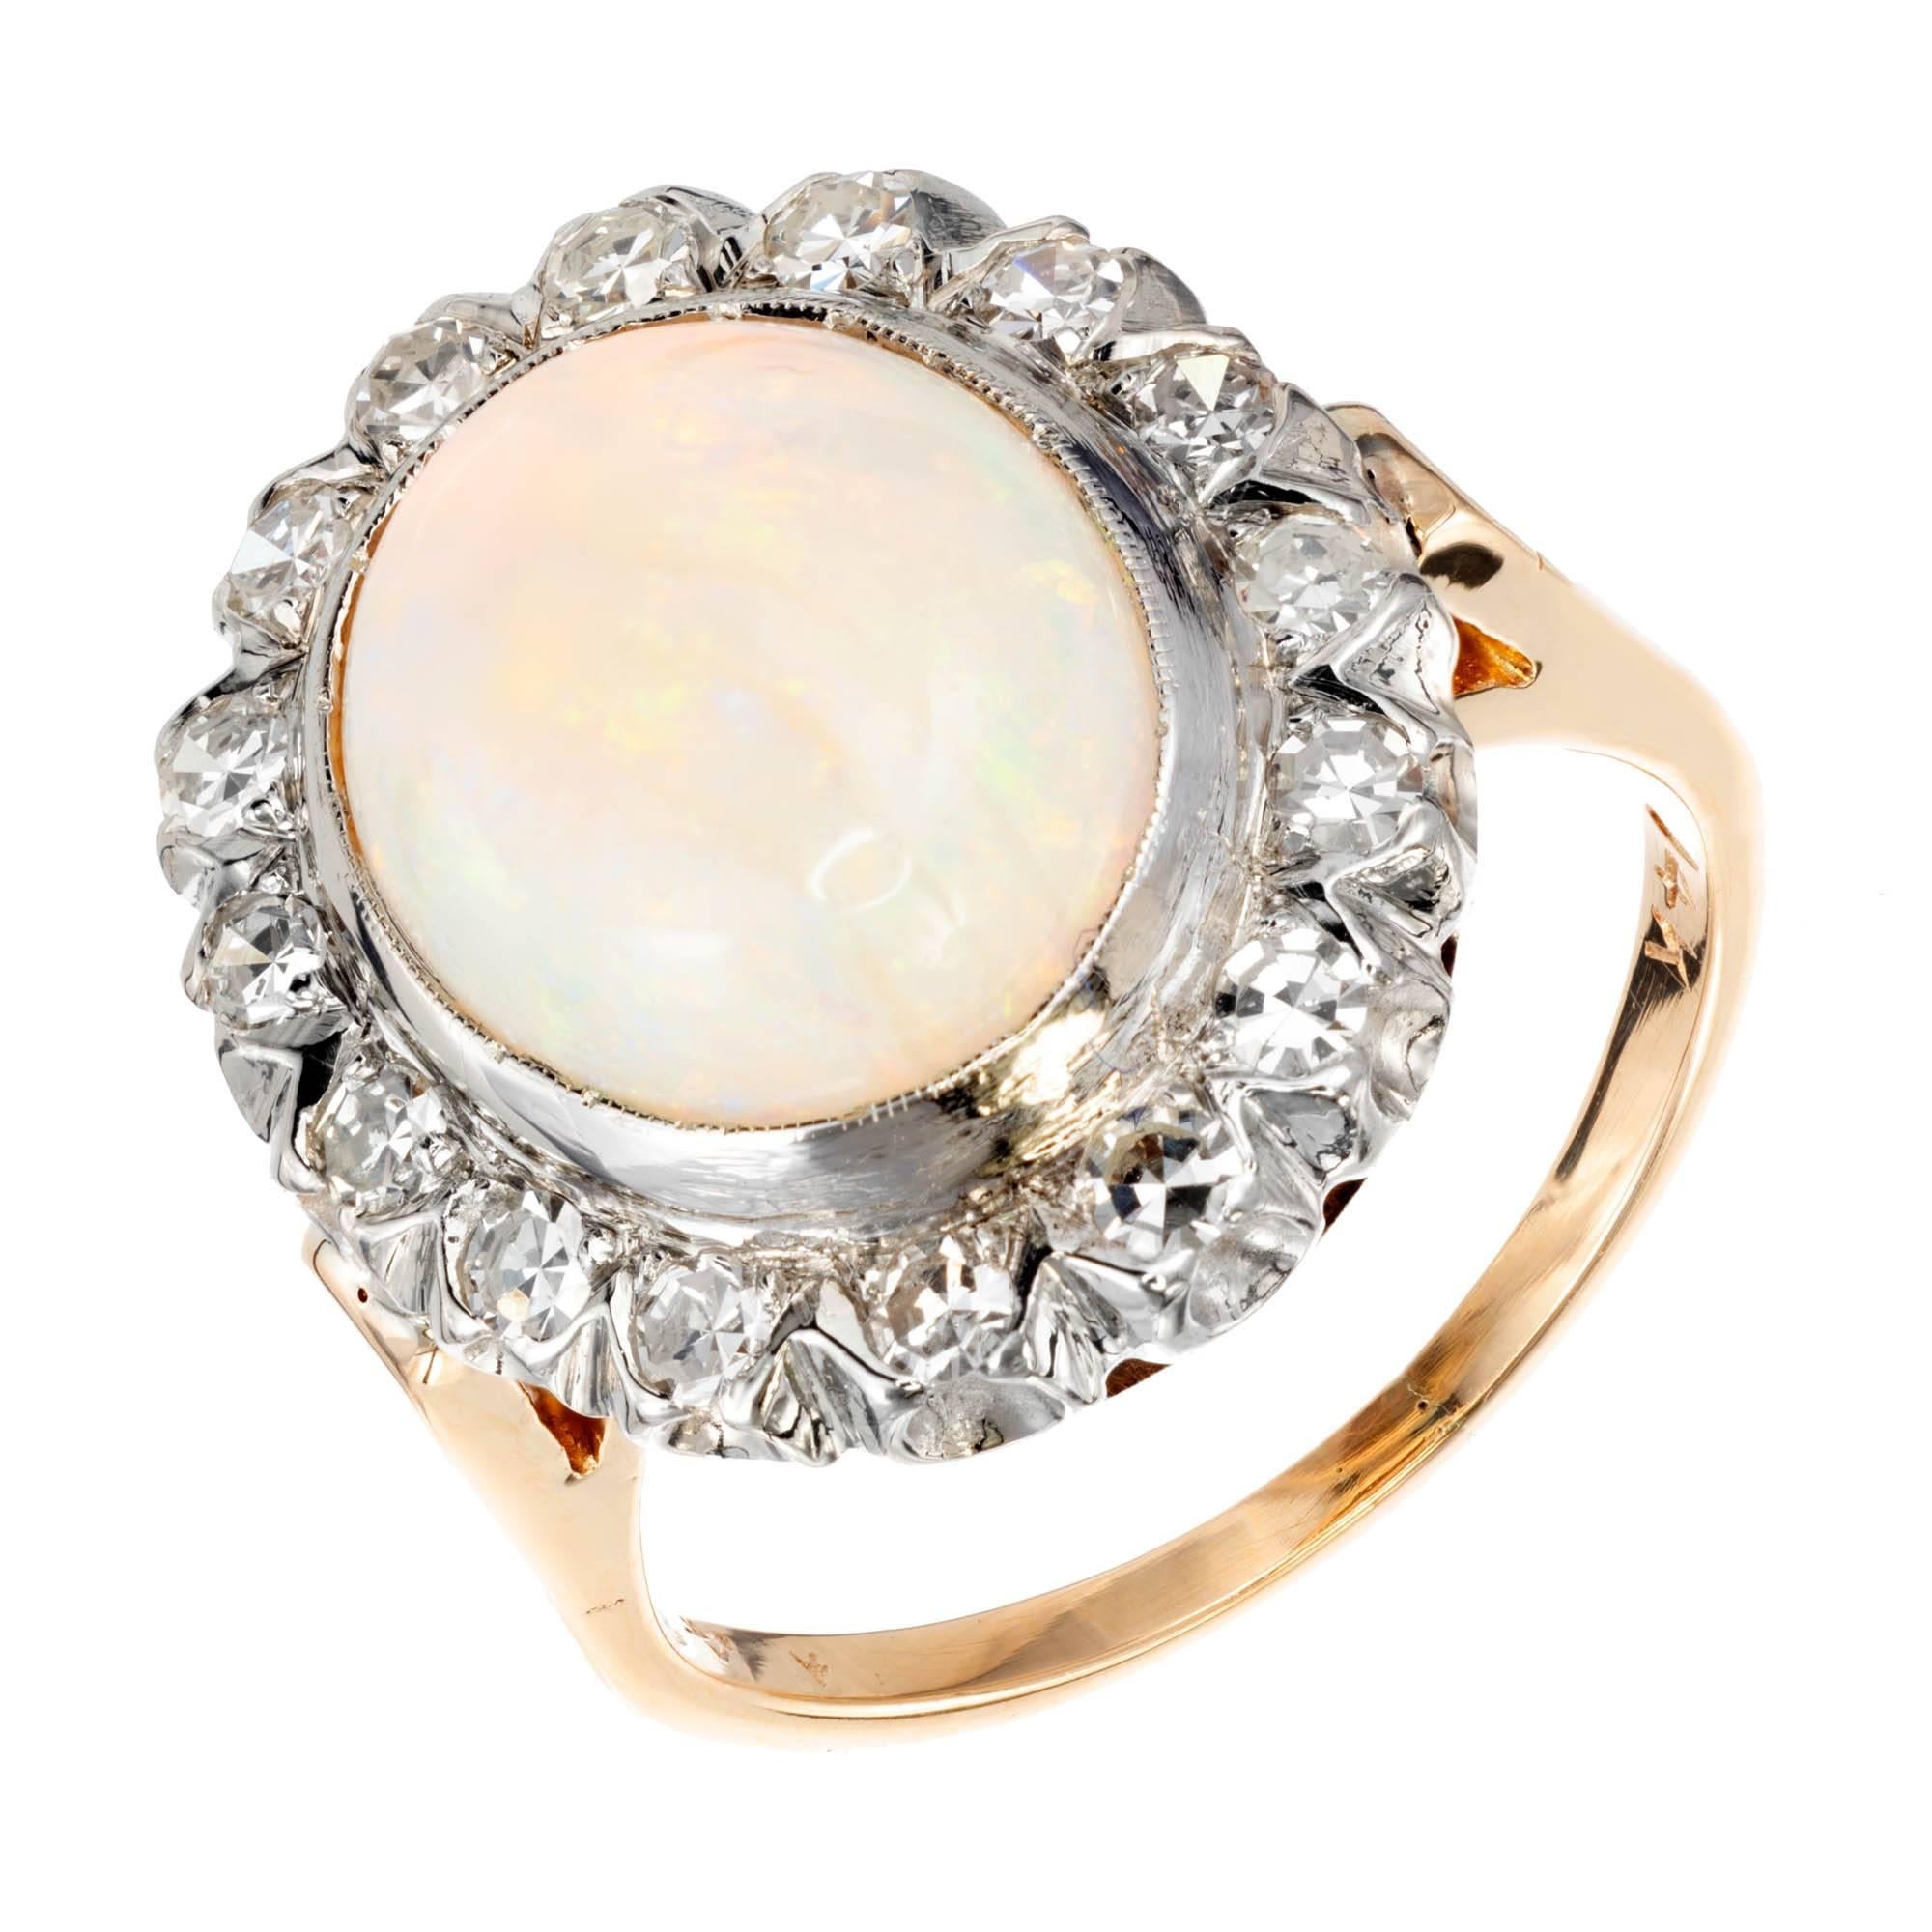 Well-polished blue green Opal and diamond cocktail ring. 14k Yellow gold setting with a white gold crown. Opal is surrounded by a halo of round diamonds. 

1 Oval fine blue green Opal, approx. total weight 3.50cts, VS, 13 x 10mm
16 round single cut